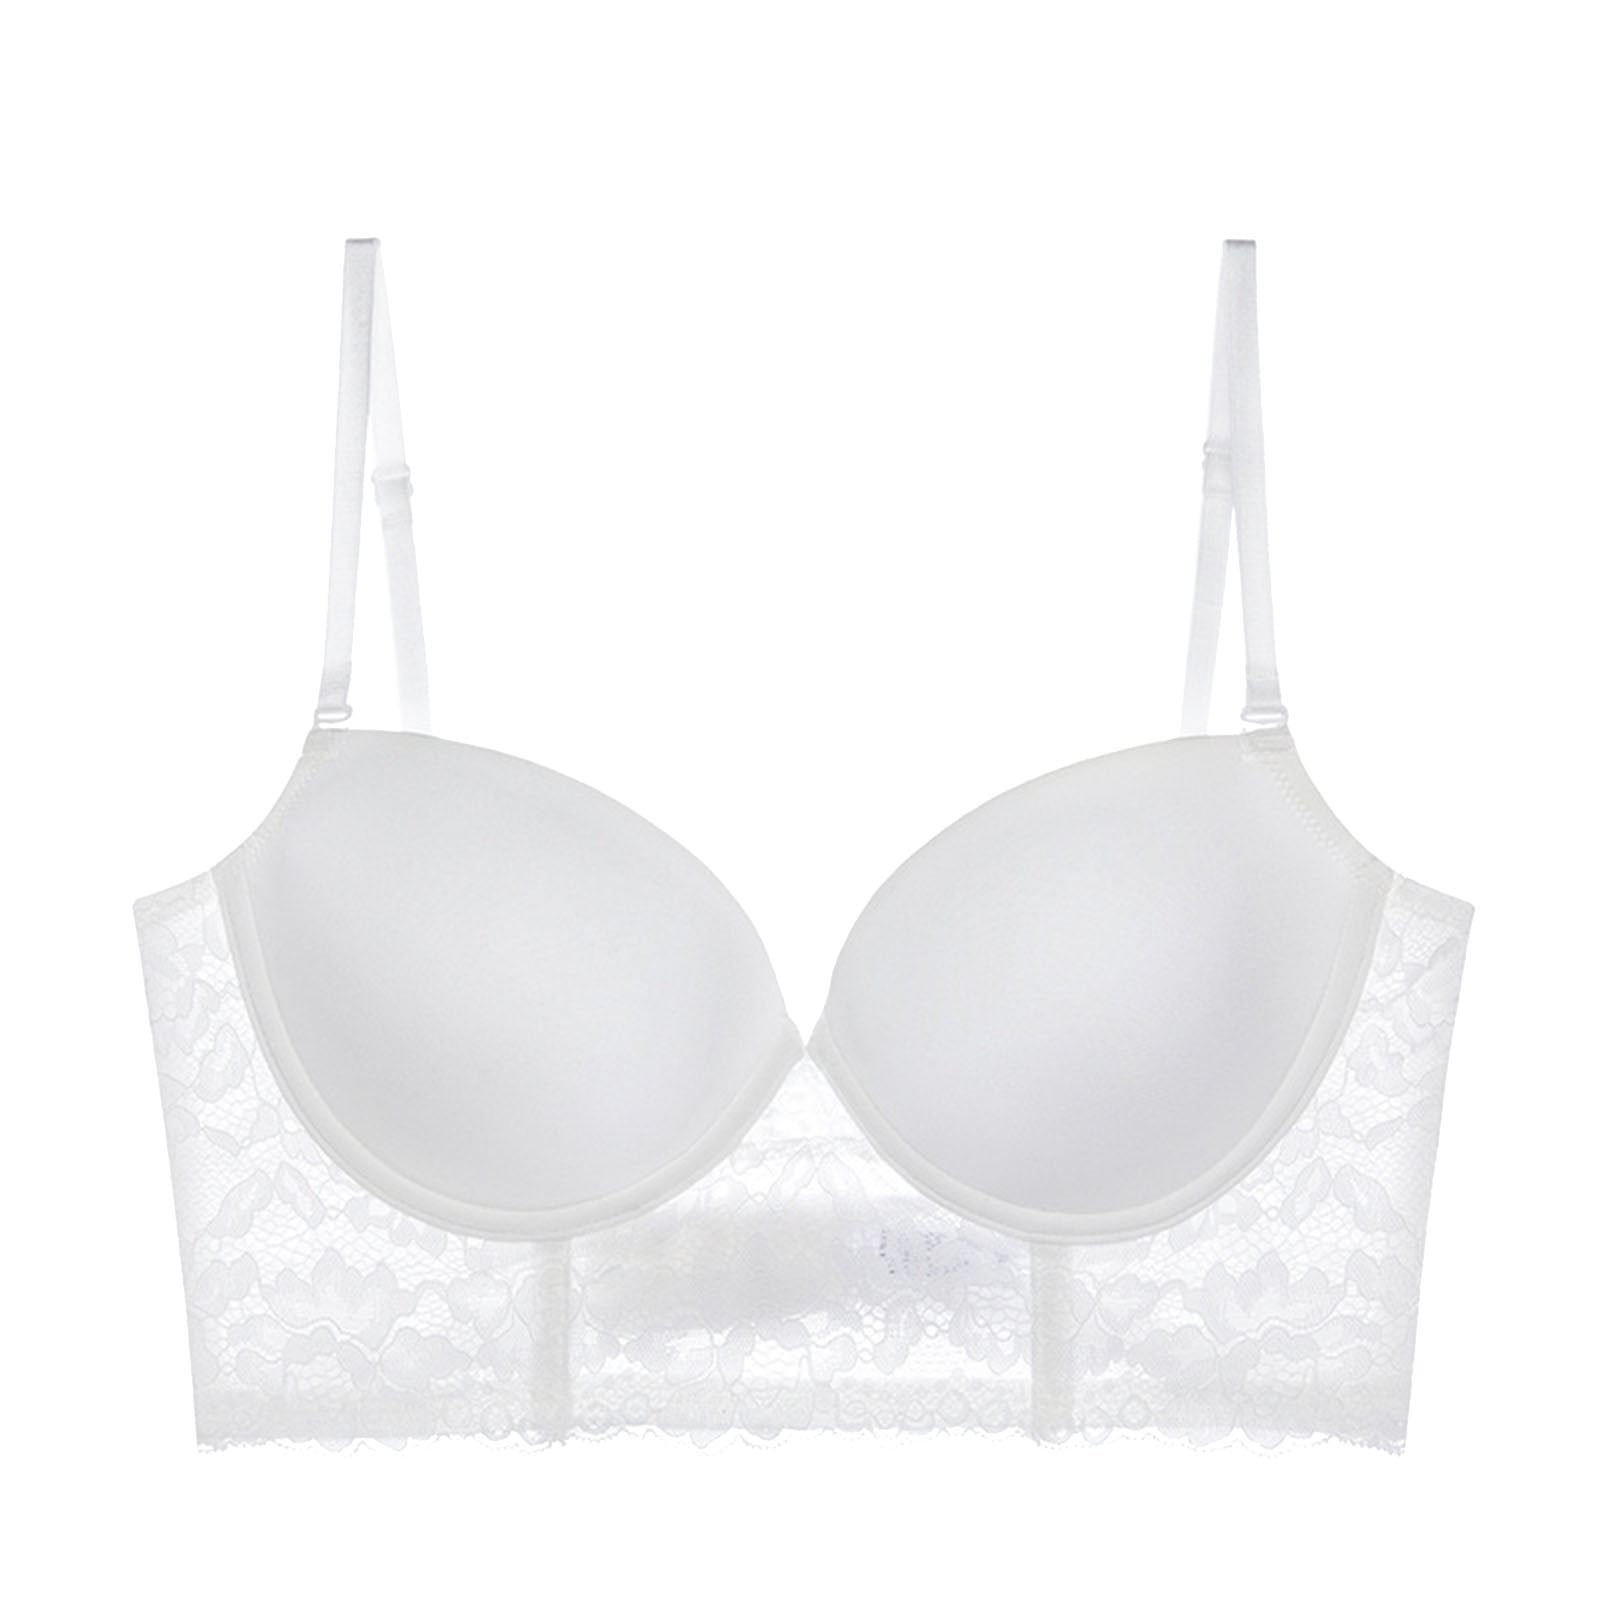 Aayomet Push Up Bra Women's Sheer Mesh Full Coverage Unlined Underwire Bra,  Supportive Plus Size Bras, See-Through Bras,White 75C